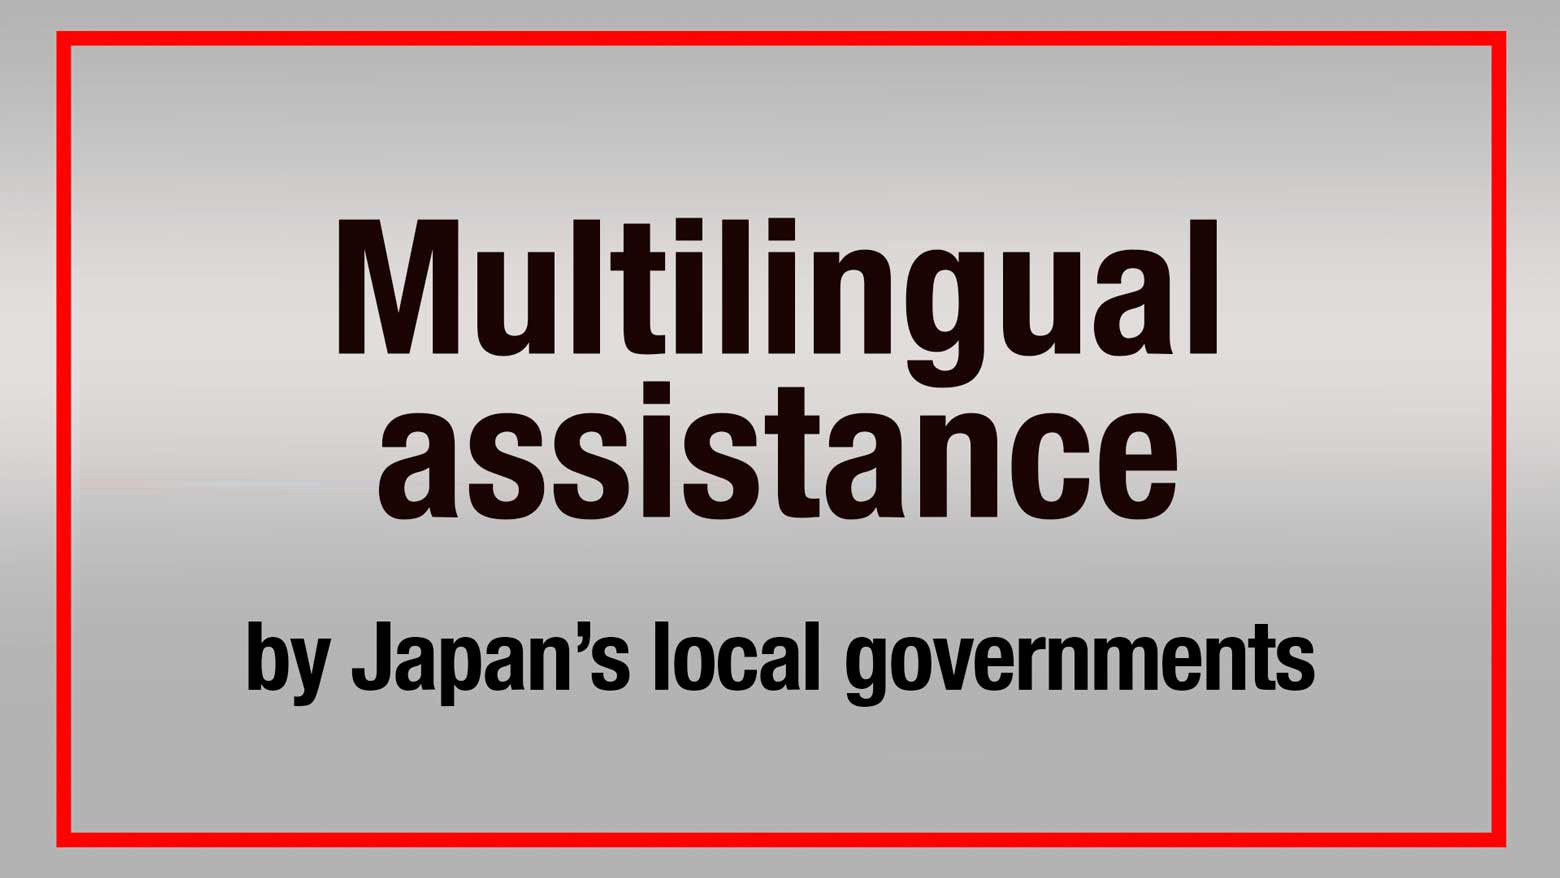 Multilingual information and services from Japan’s local governments